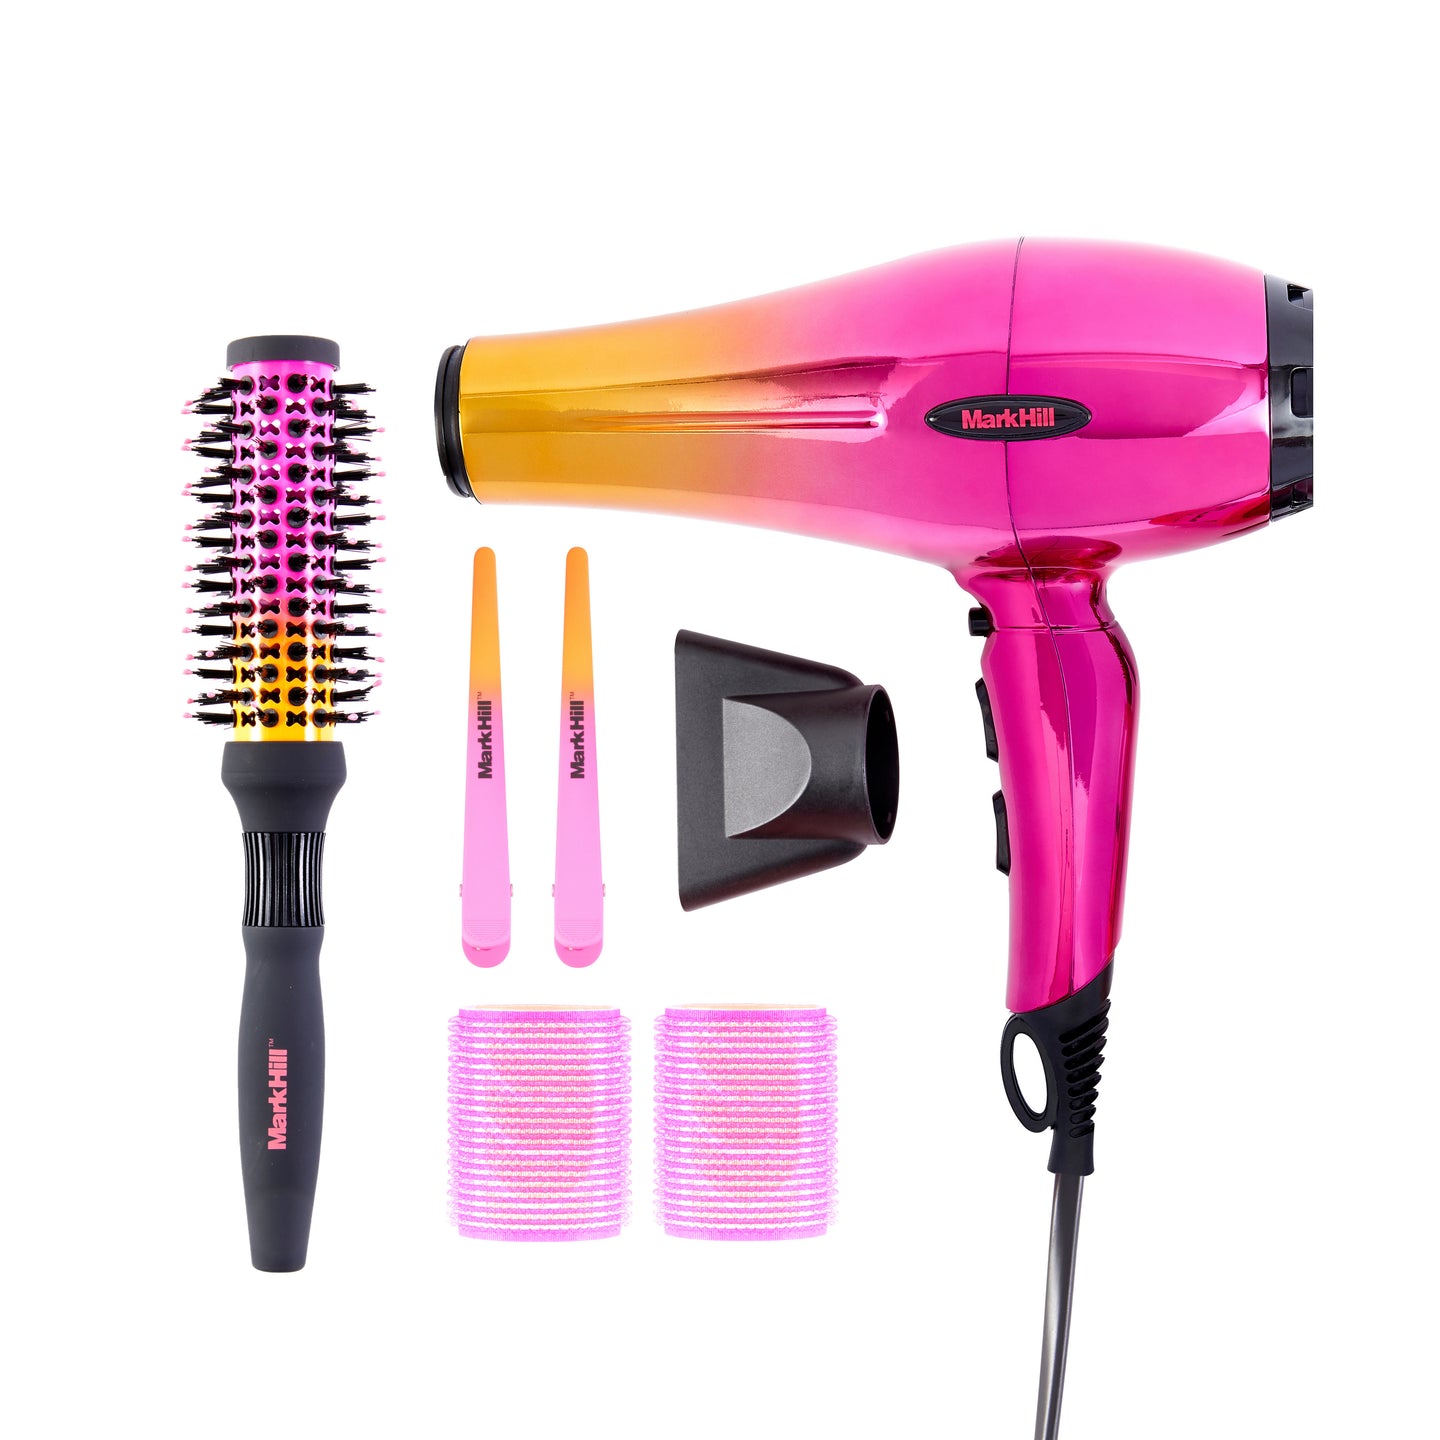 The Perfect Blow Dry Hairdryer Kit